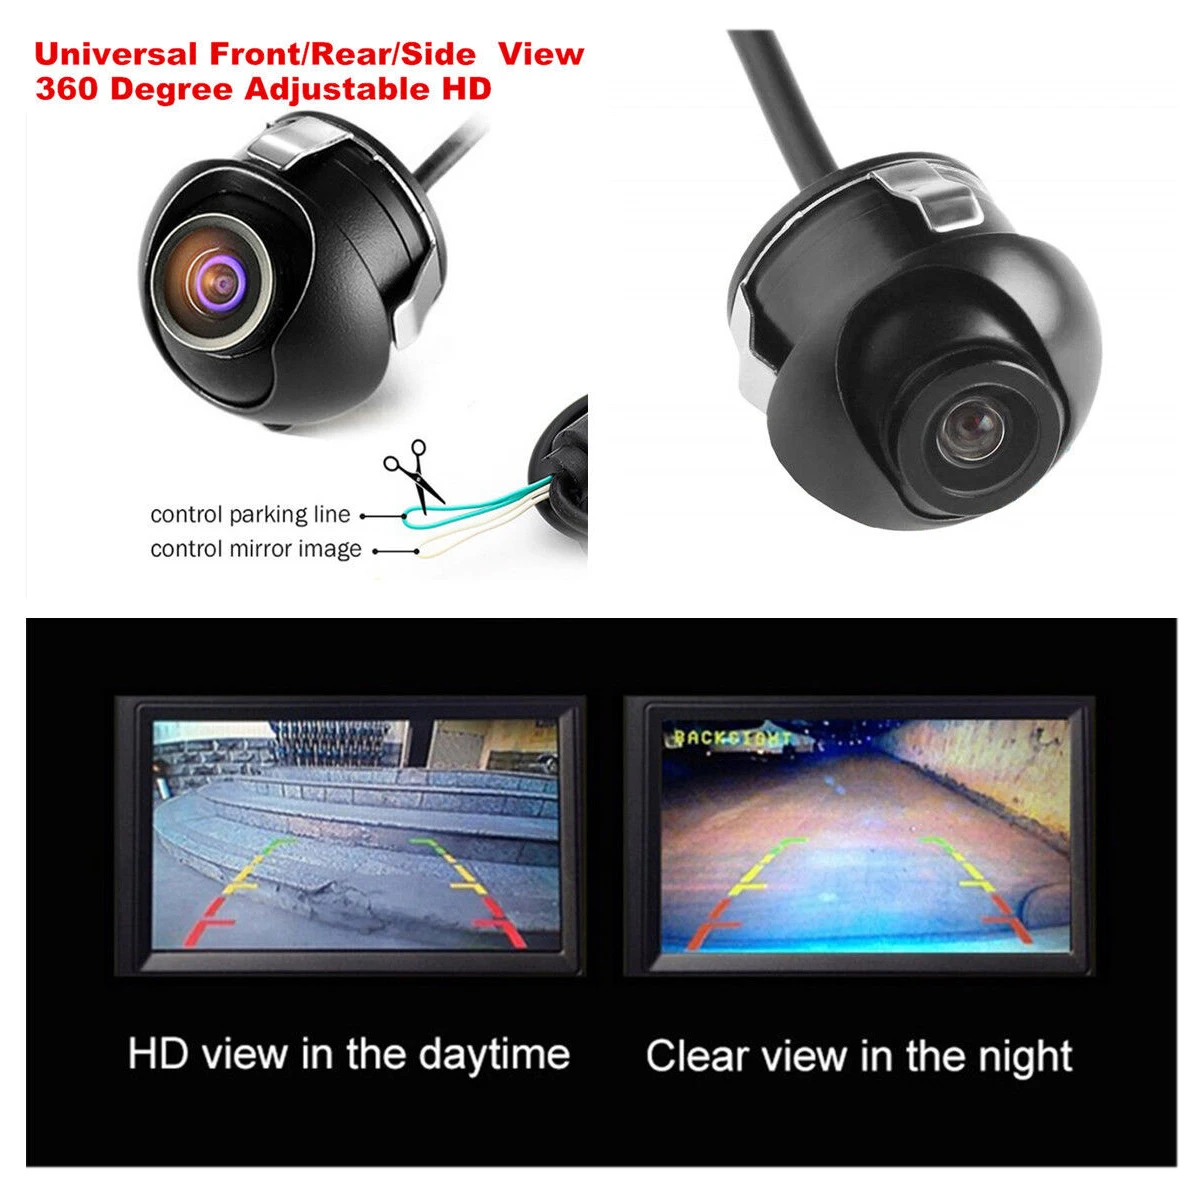 12V 360 Degree Waterproof HD CCD Car Rear View Camera Rearview Car Infrared Night Vision Mini Waterproof Auto Parking Assistance